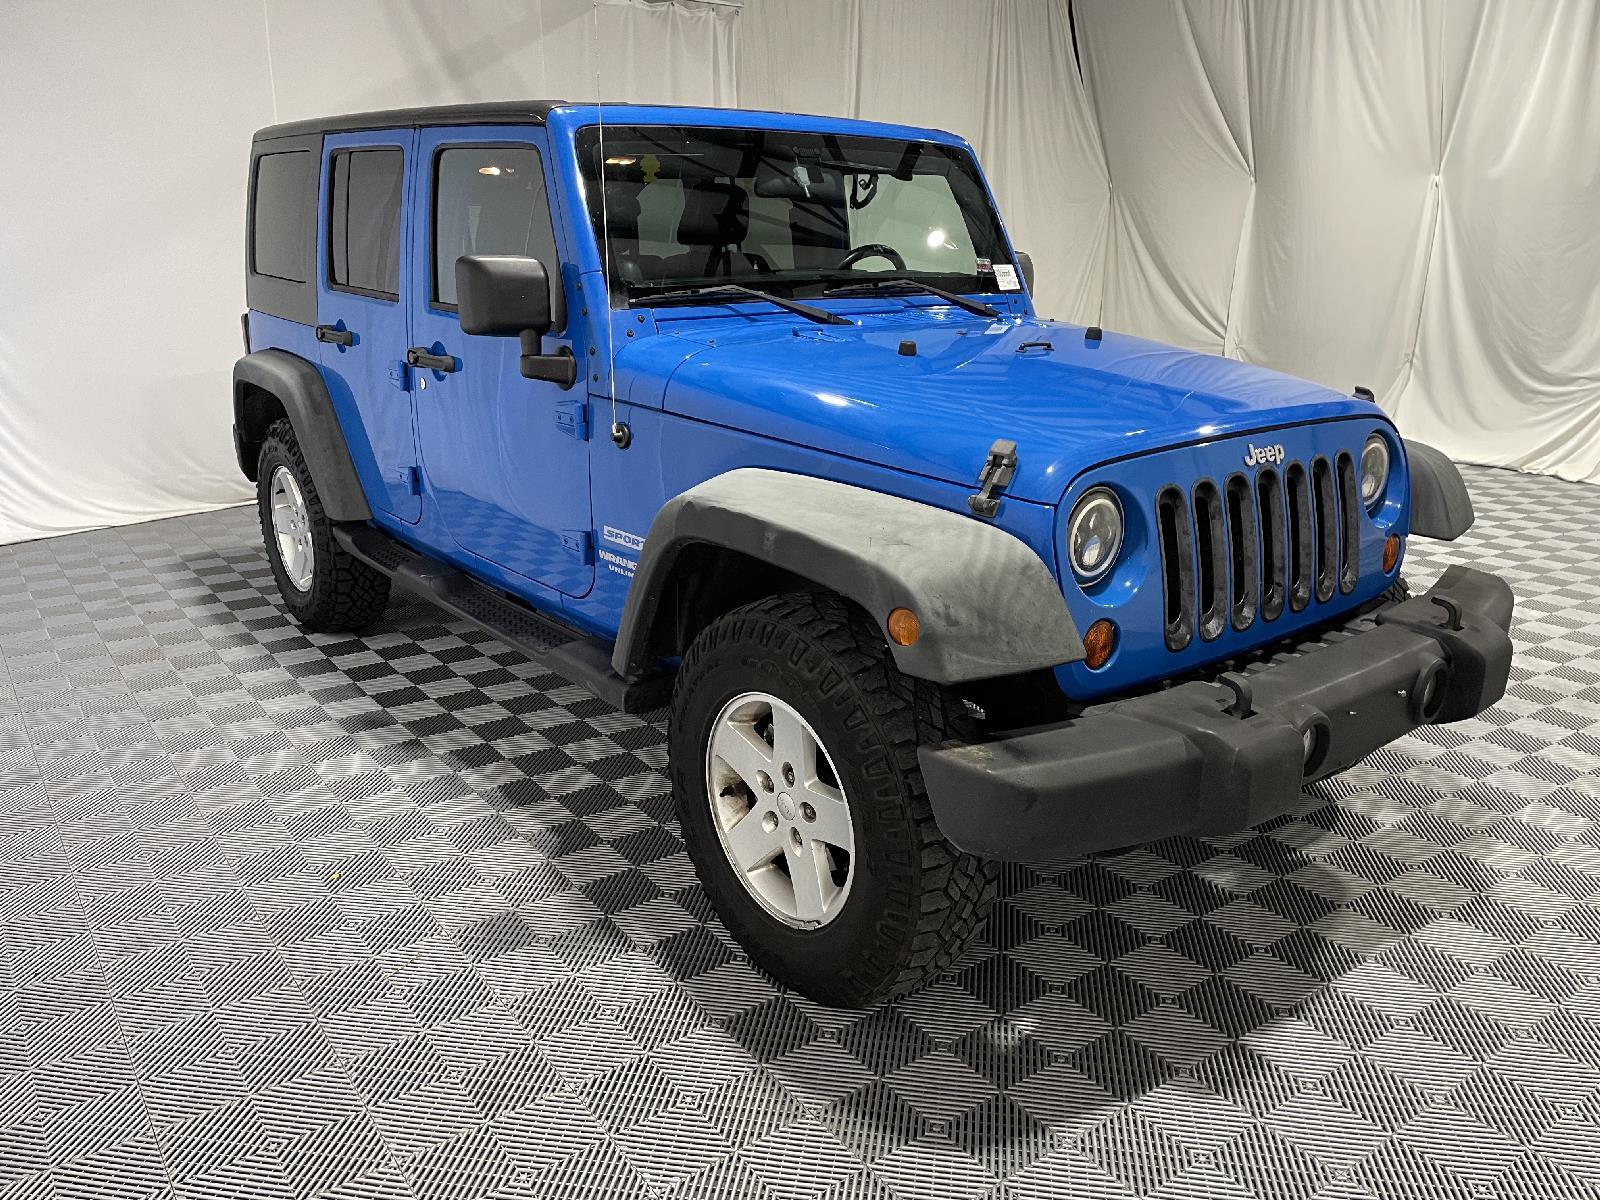 Used 2011 Jeep Wrangler Unlimited Sport 4 door for sale in St Joseph MO